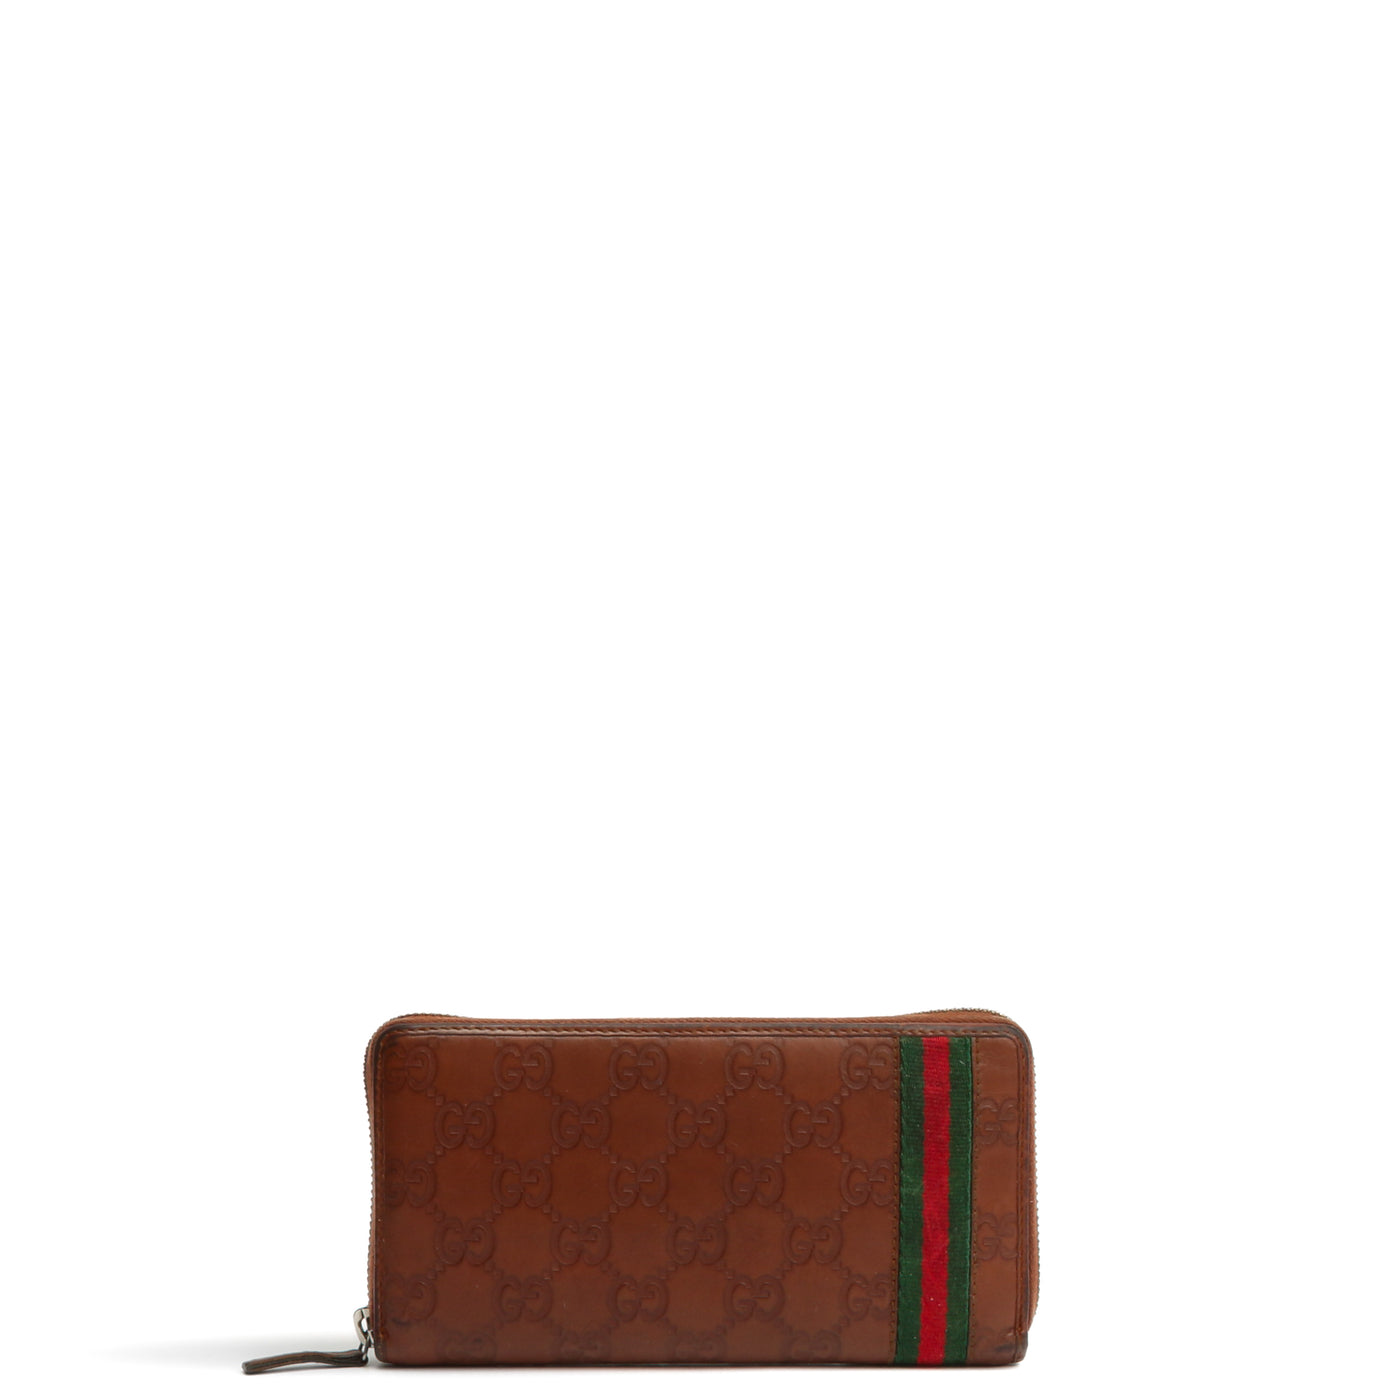 GUCCI Guccissima Zip Around Wallet - OUTLET FINAL SALE